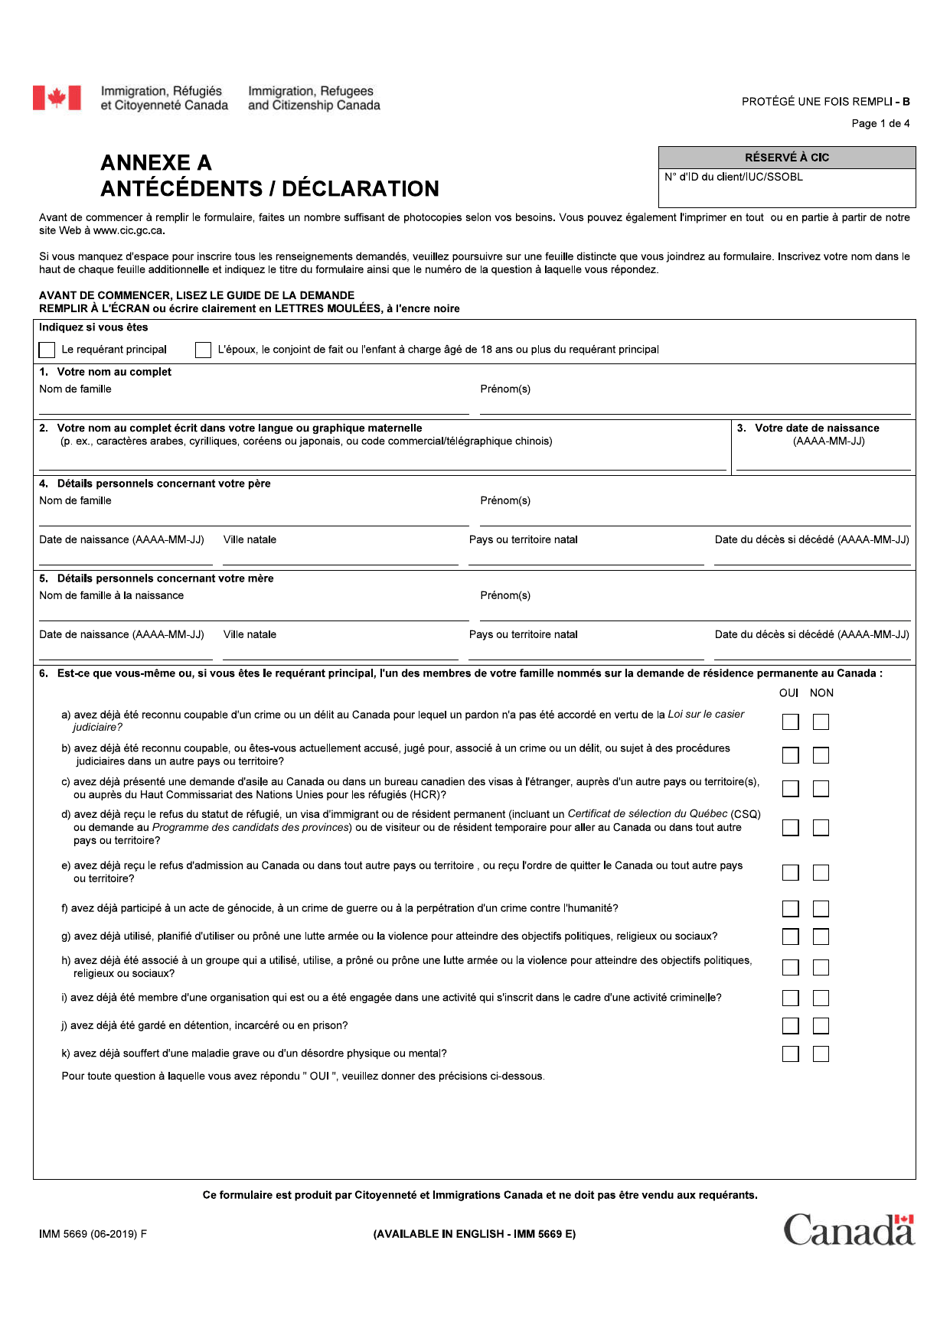 Forme IMM5669 Supplement A Antecedents / Declaration - Canada (French), Page 1